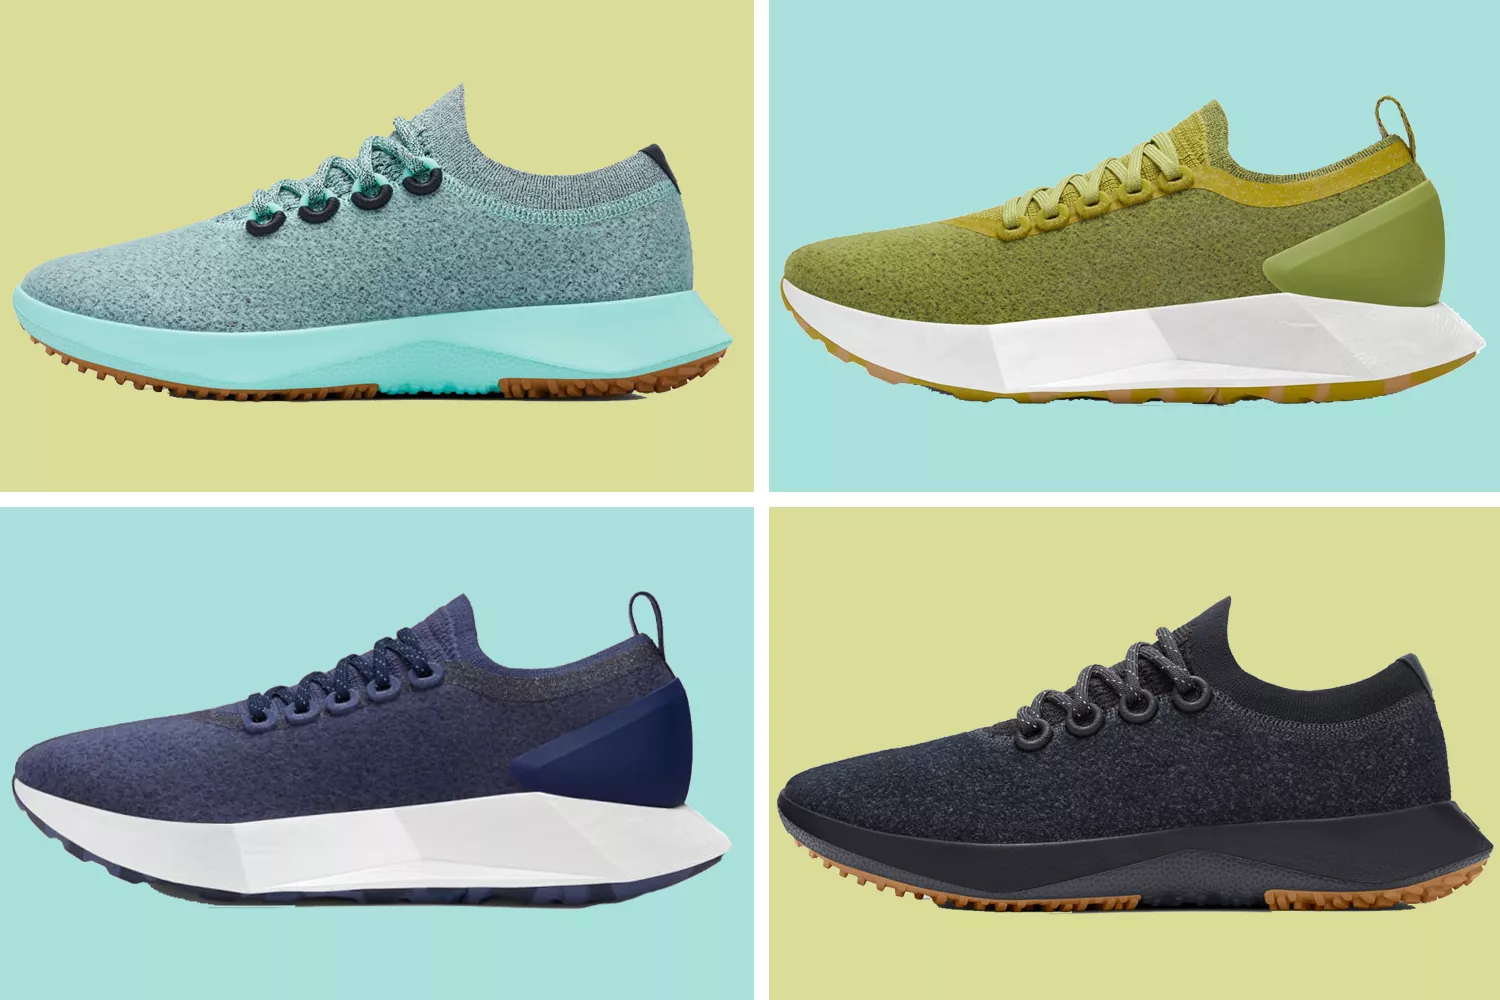 Customers claim that Allbirds' newest pair of cold-weather running sneakers are comfortable "from the moment" you put them on.